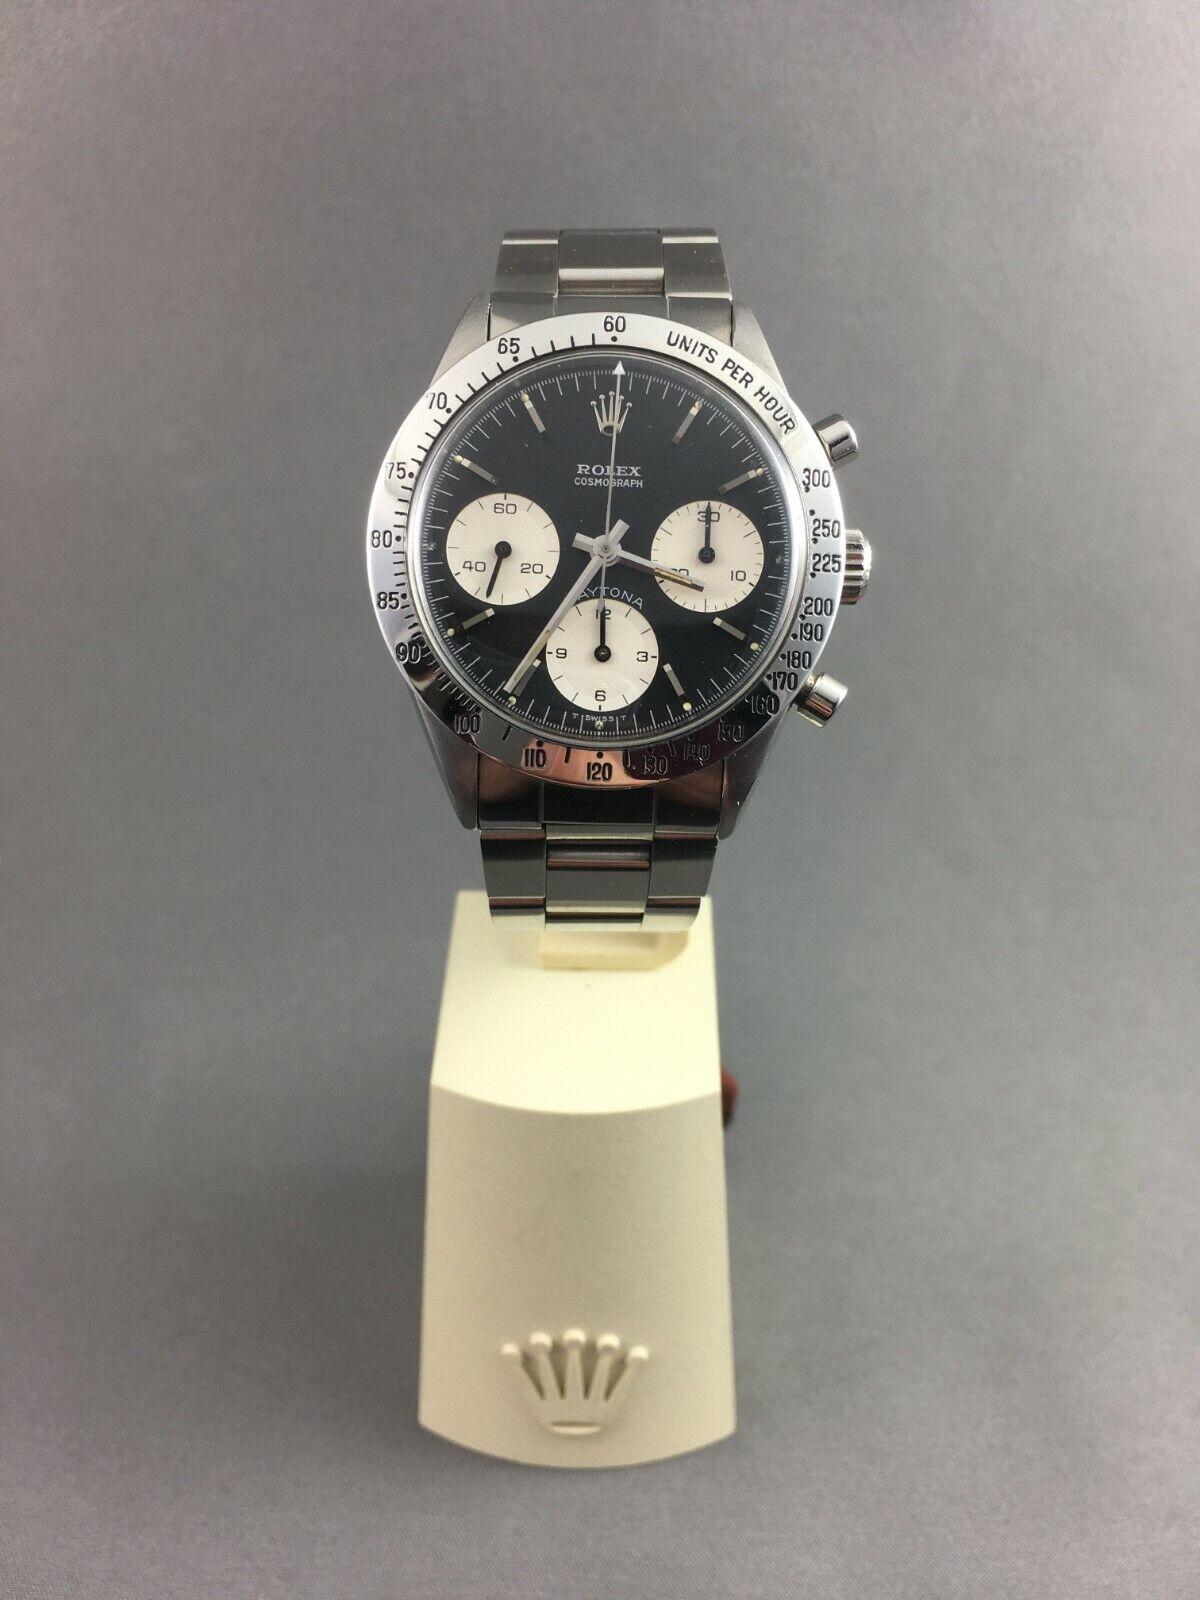 Vintage Rolex Daytona Blue Cosmograph 6239 Circa 1966



Description / Condition: All watches have been professionally scrutinized and serviced prior to being offered for sale. This model is referred to as the Daytona Blue due to the slight blue